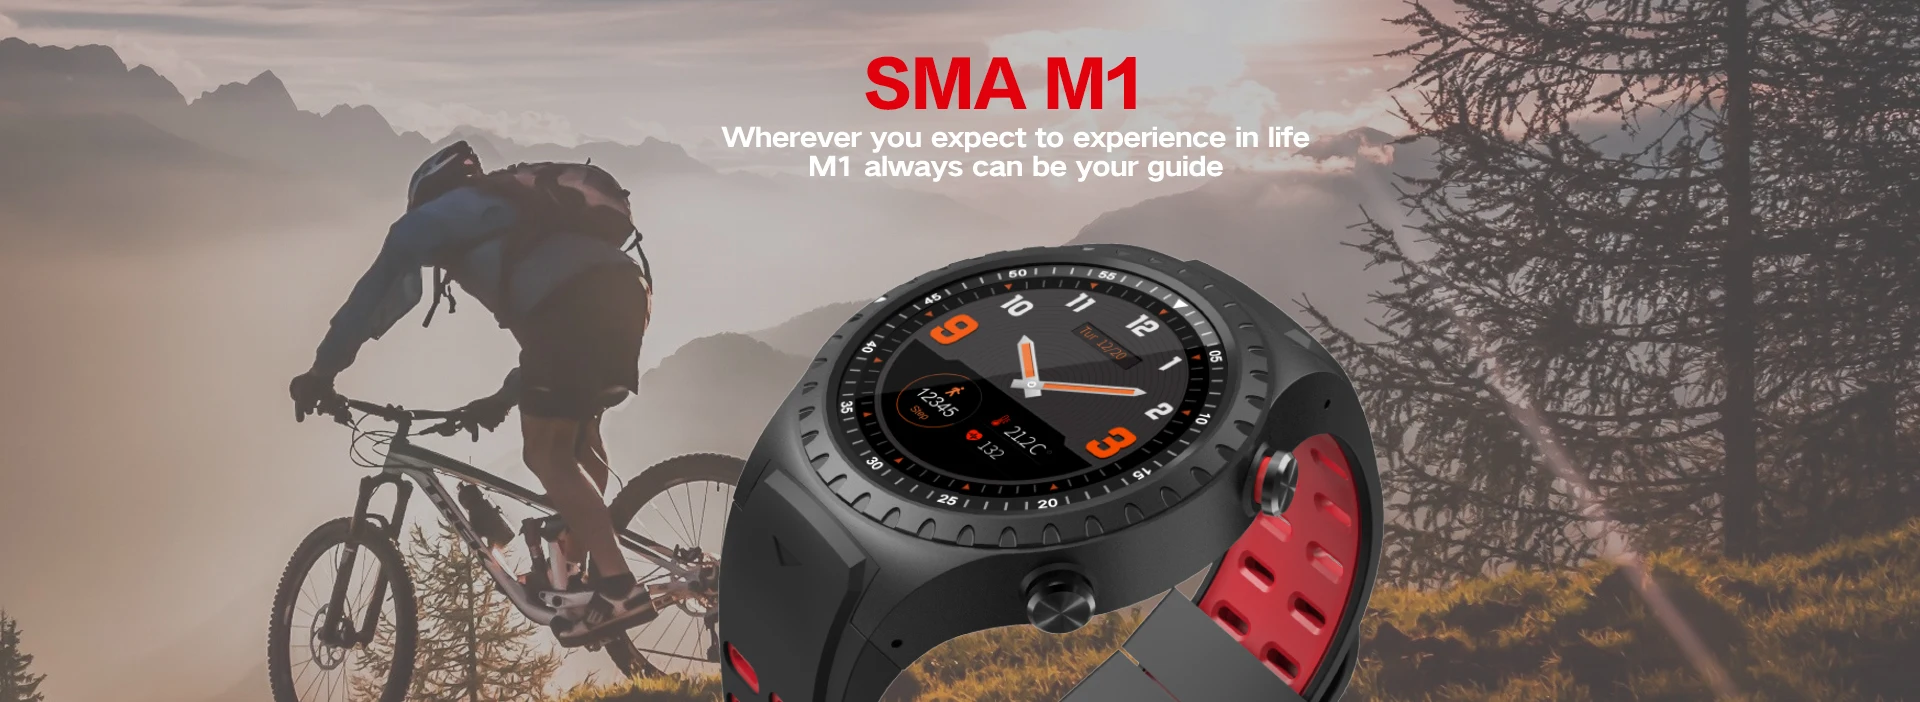 Gps Sport Watch Supports Pedometer Running/climbing/bicycling And Ip68  Waterproof - Buy Gps Sport Watches,Smart Watch,Digital Sport Watches  Product on Alibaba.com